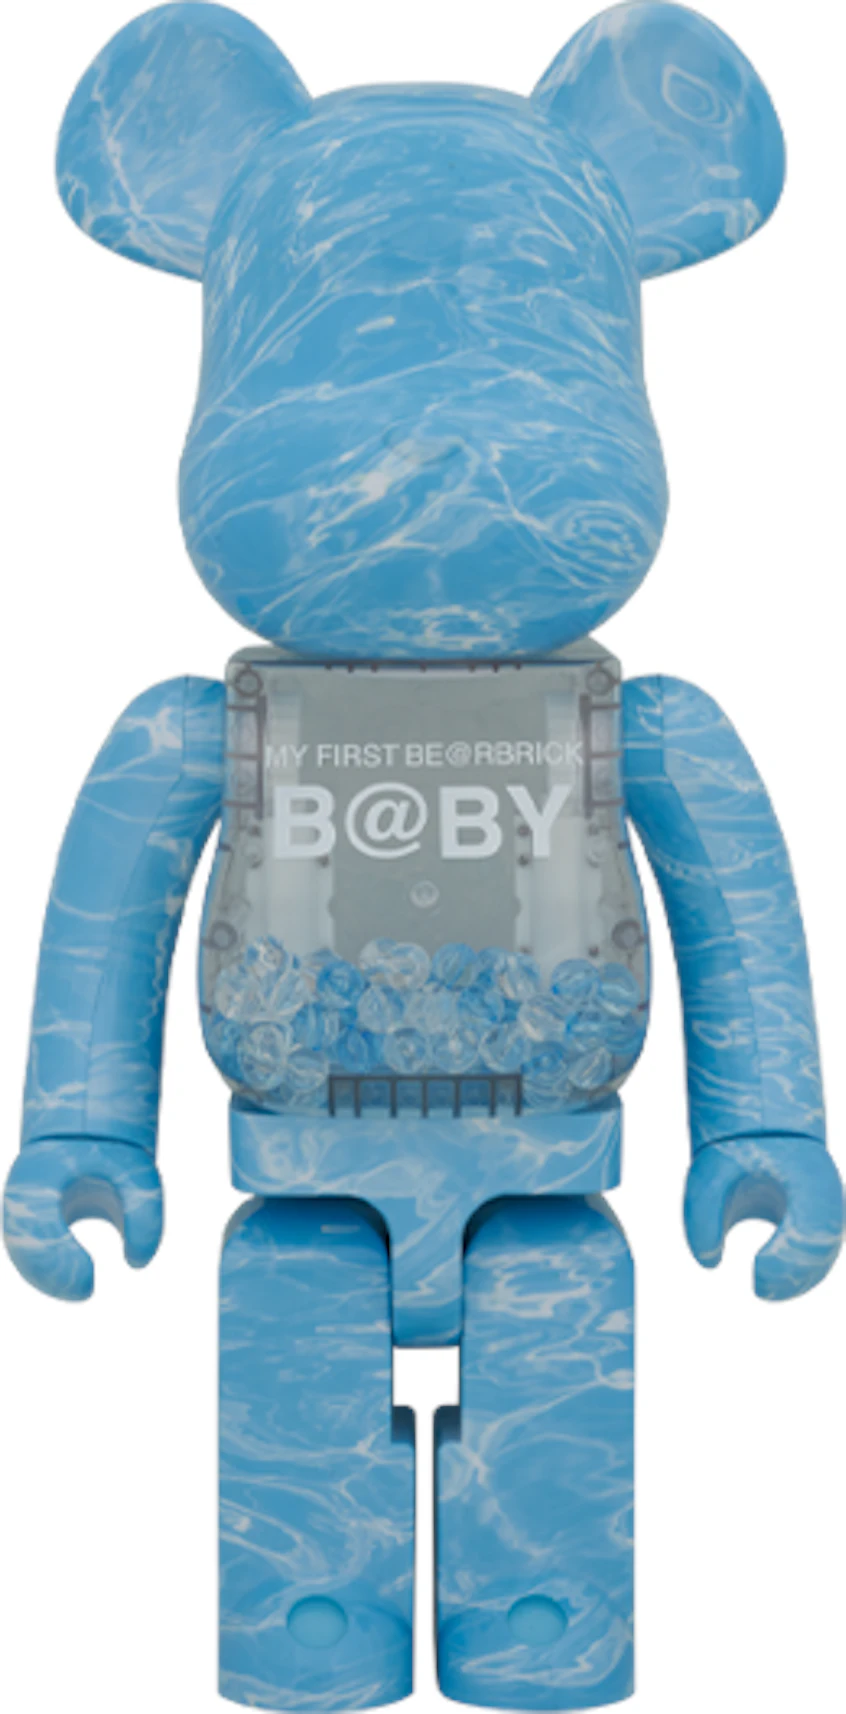 MY FIRST BE@RBRICK B@BY WATER CREST1000%